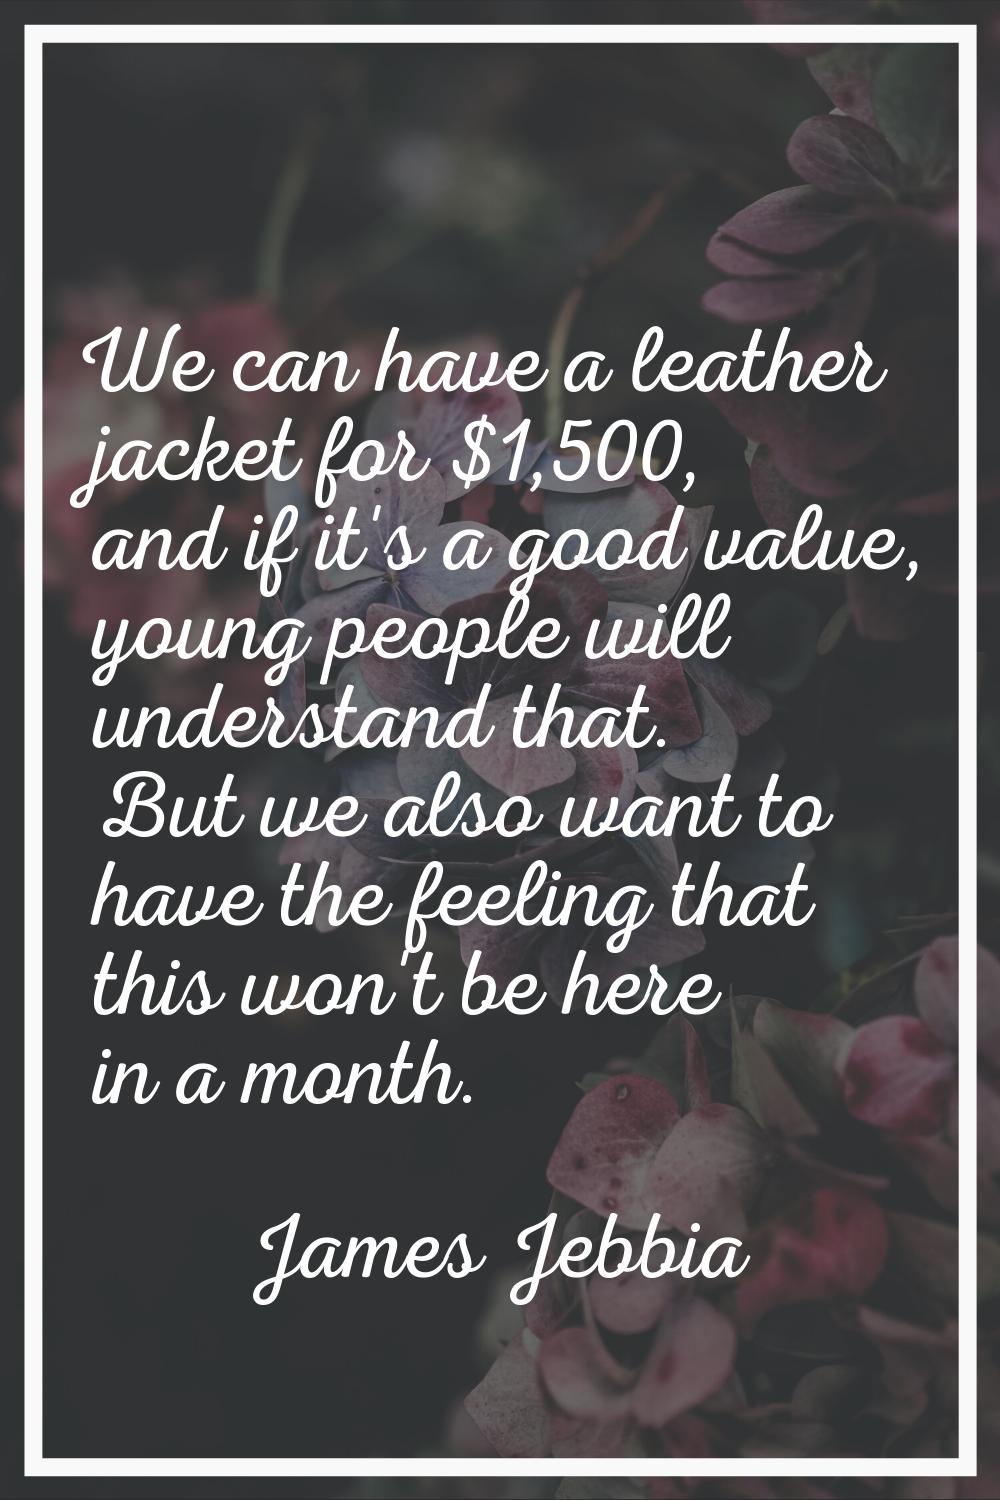 We can have a leather jacket for $1,500, and if it's a good value, young people will understand tha